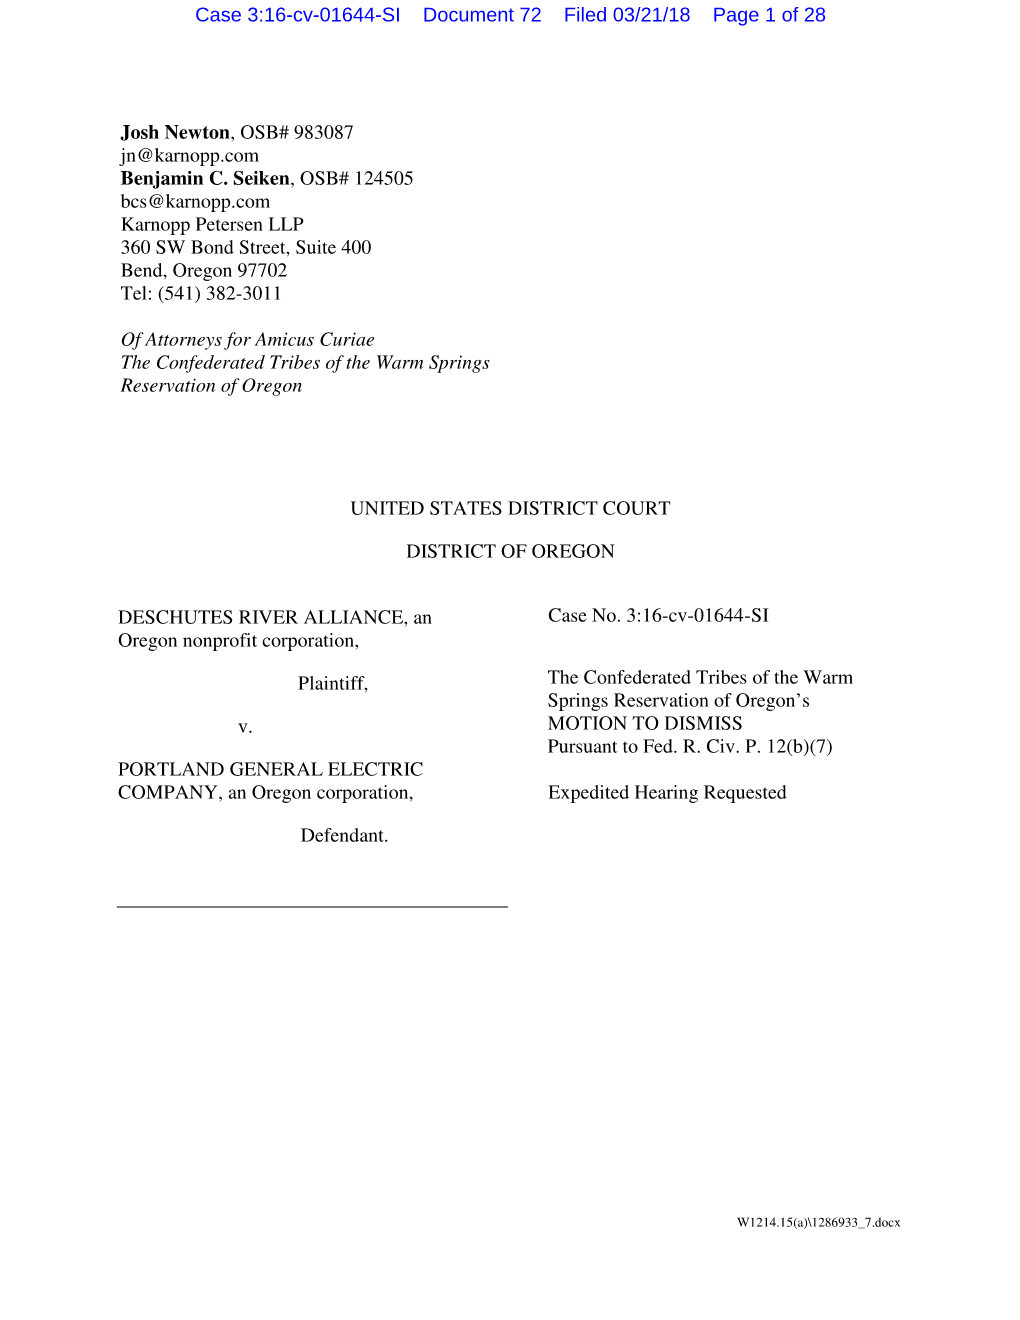 72 Warm Springs Motion to Dismiss